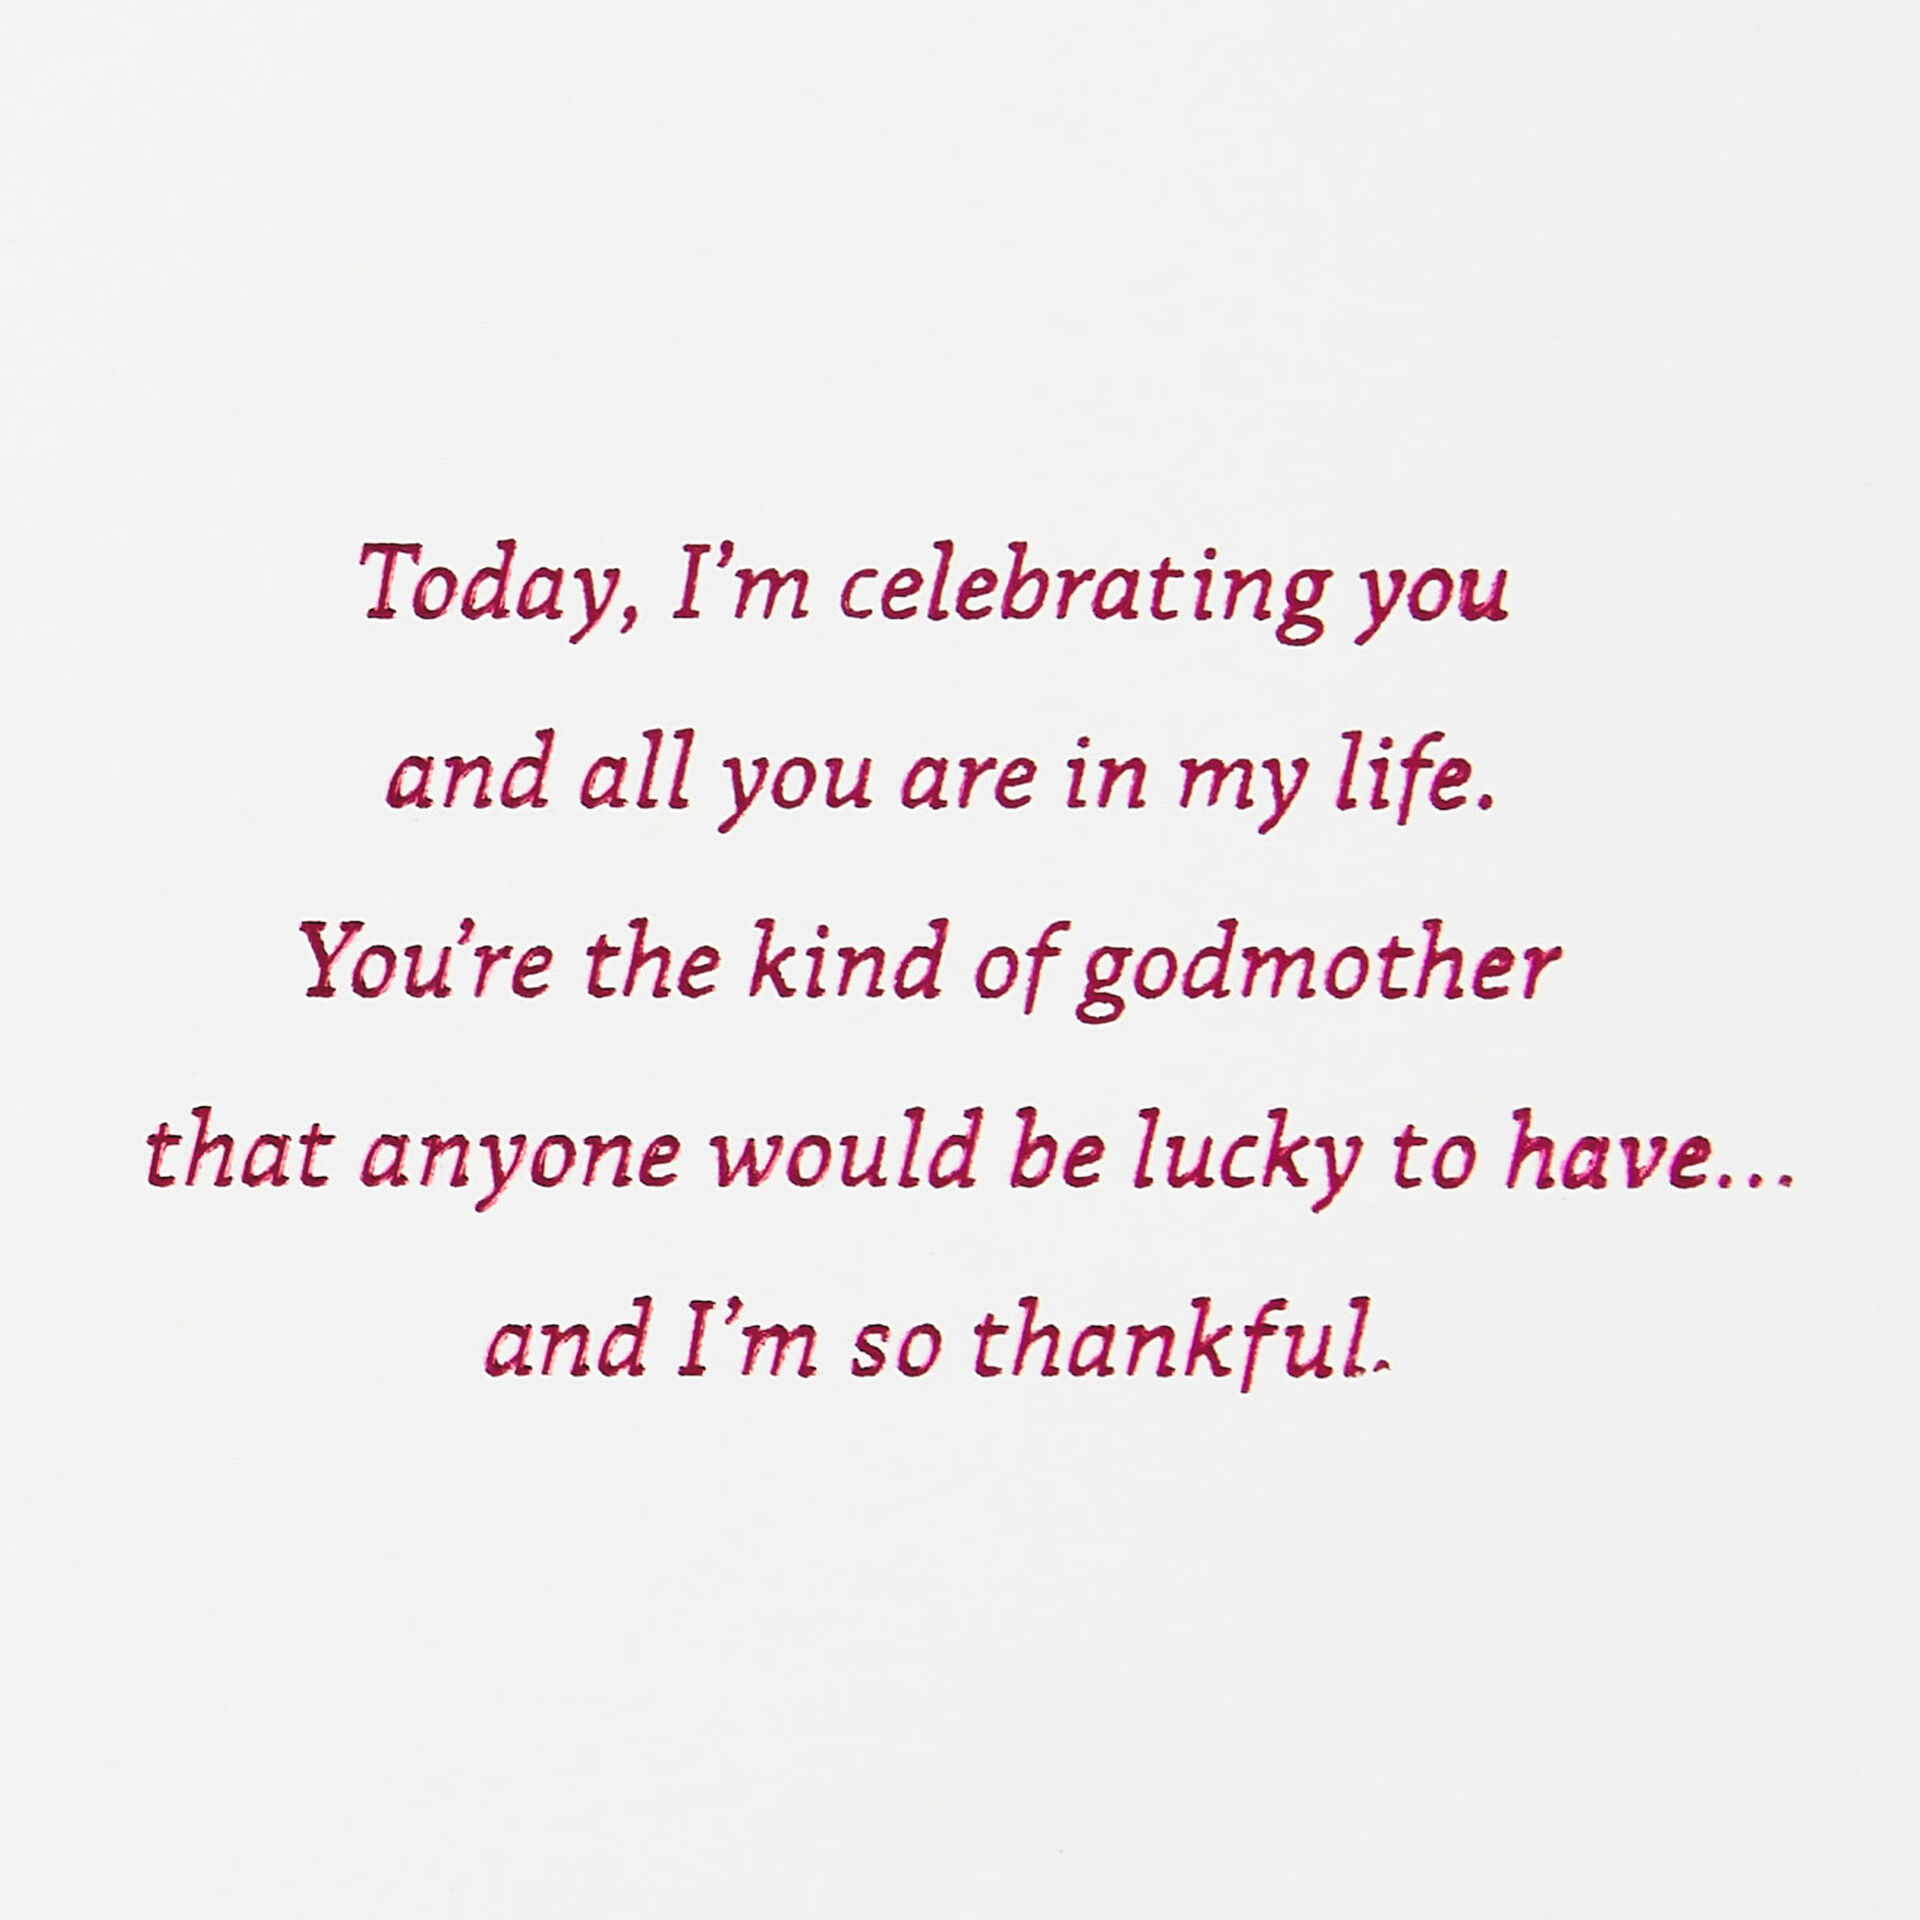 Thankful-for-You-Birthday-Card-Godmother_359FBD3984_02